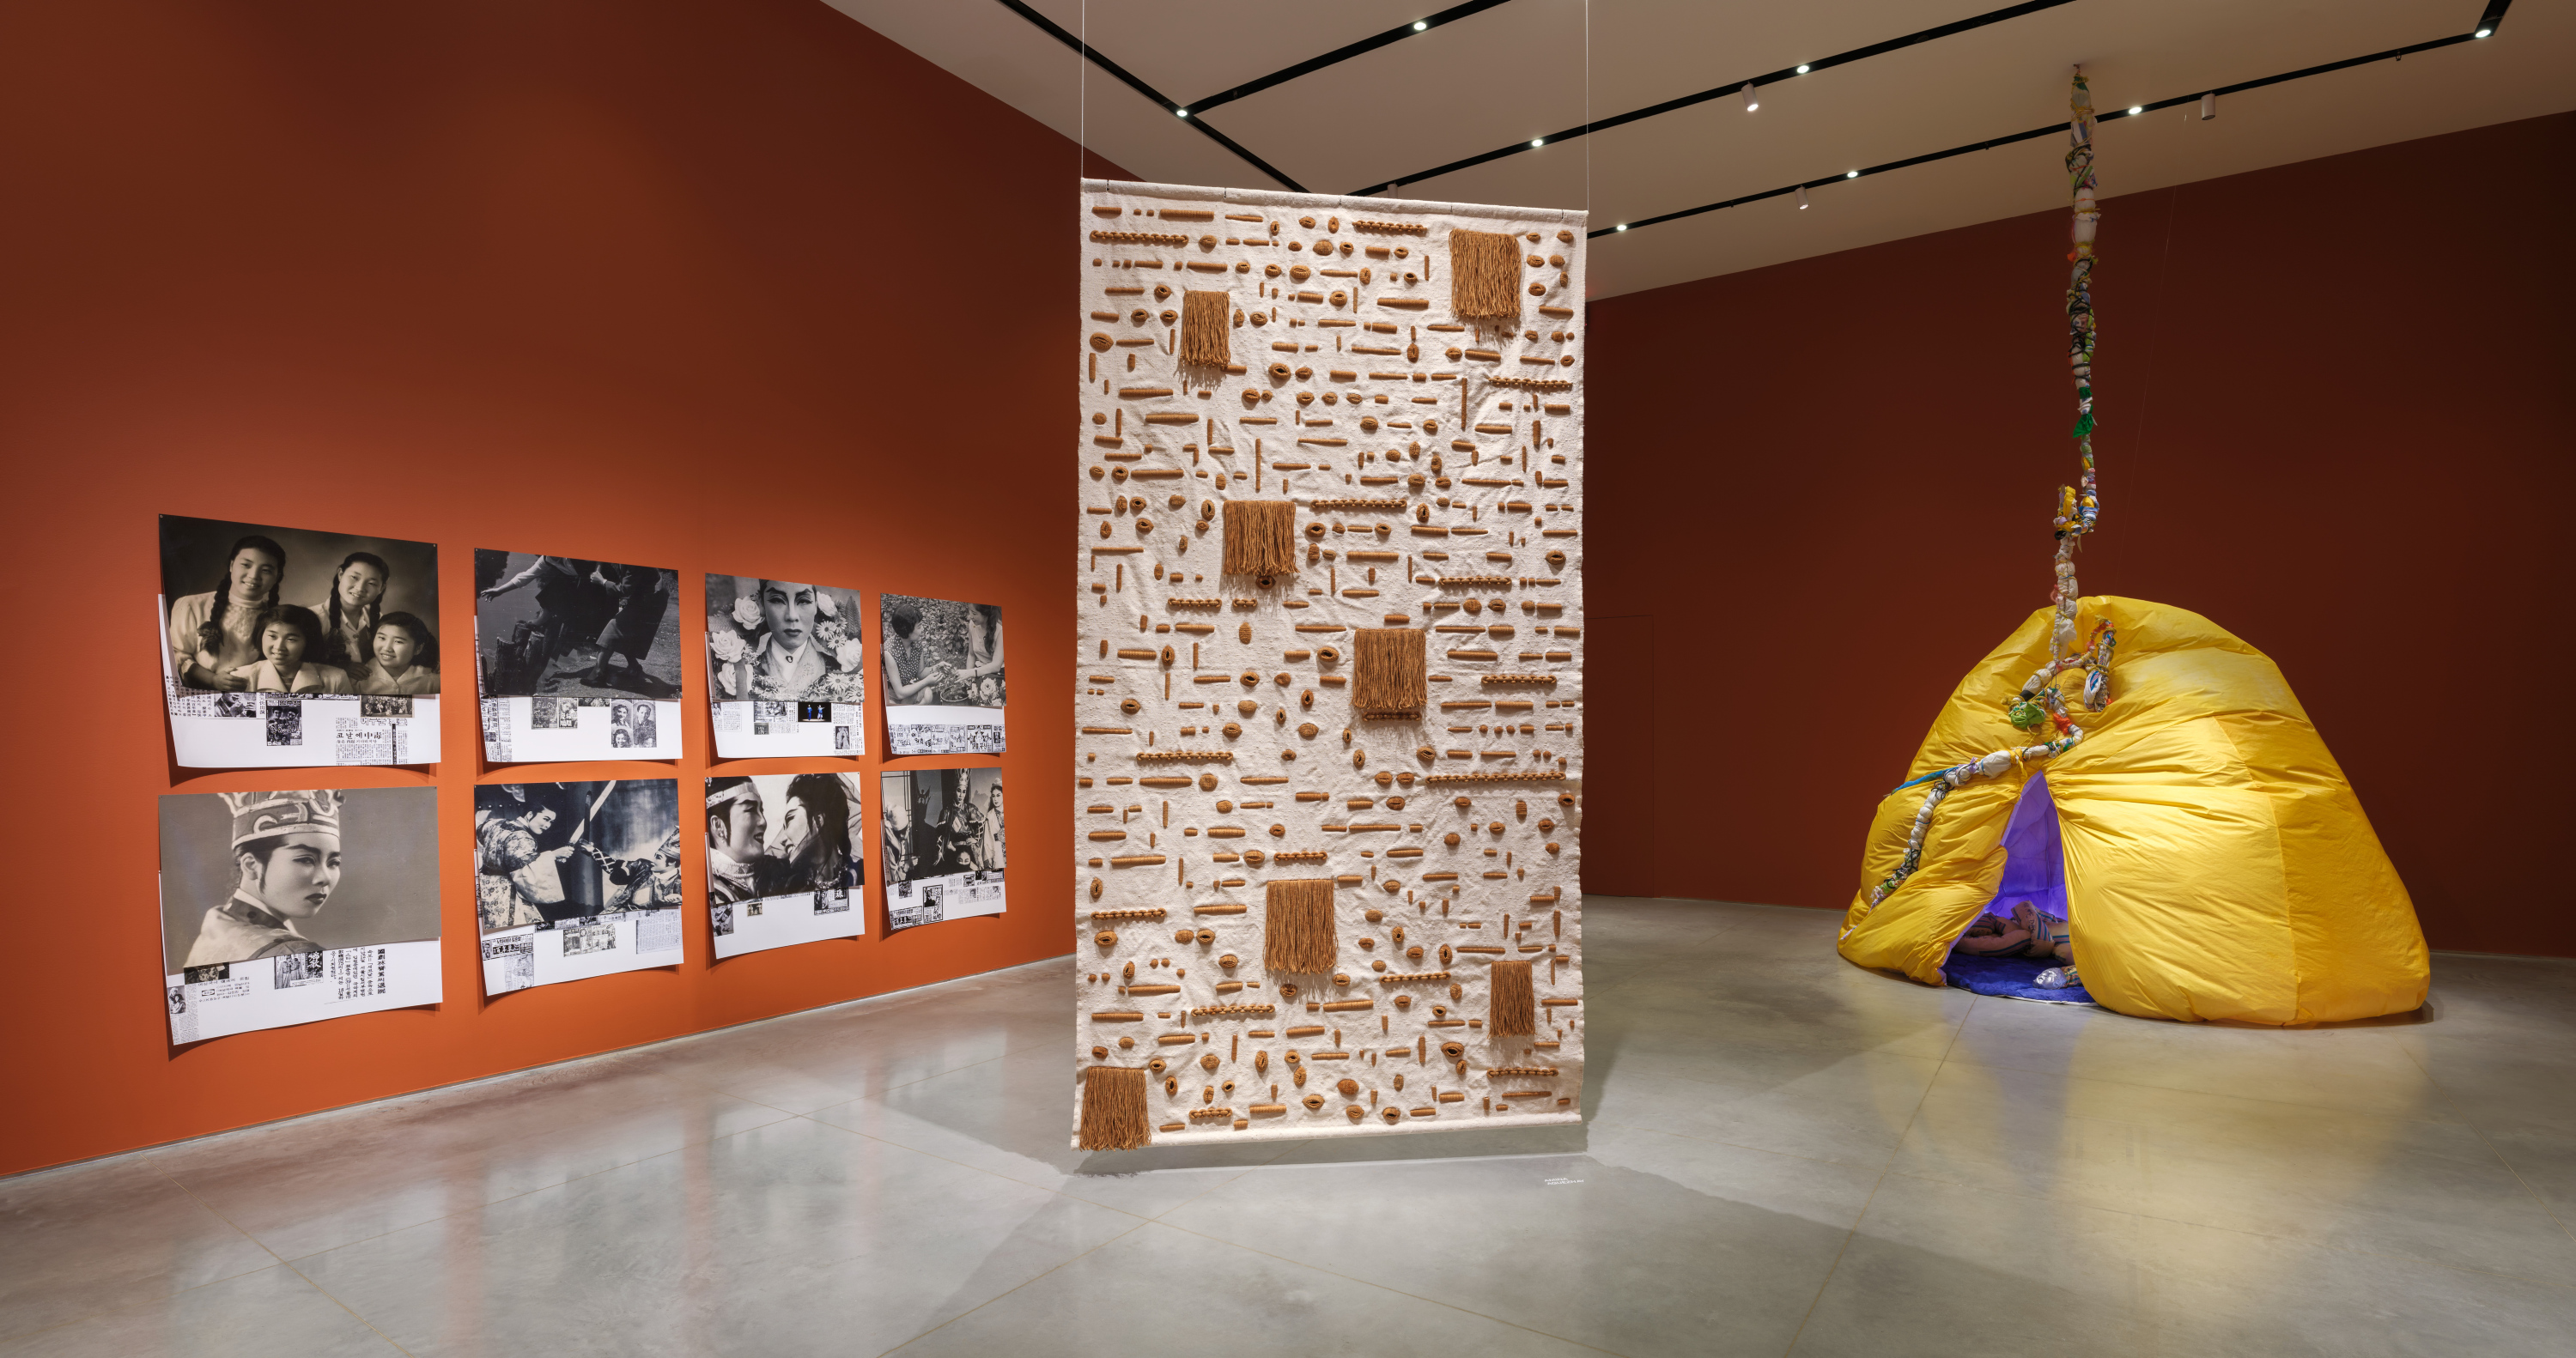 Gallery interior with terracotta-red walls and a gray floor. On the left wall is a photo collage installed in a grid featuring historical photographs of East Asian stage performers and Korean newspaper cuttings. Suspended from the ceiling in the middle of the gallery floor is a sand-colored tapestry with brown geometric details. To the right is an inflatable yellow hut, split vertically with a blue and purple plush interior. A fabric snake is coiled on the floor.